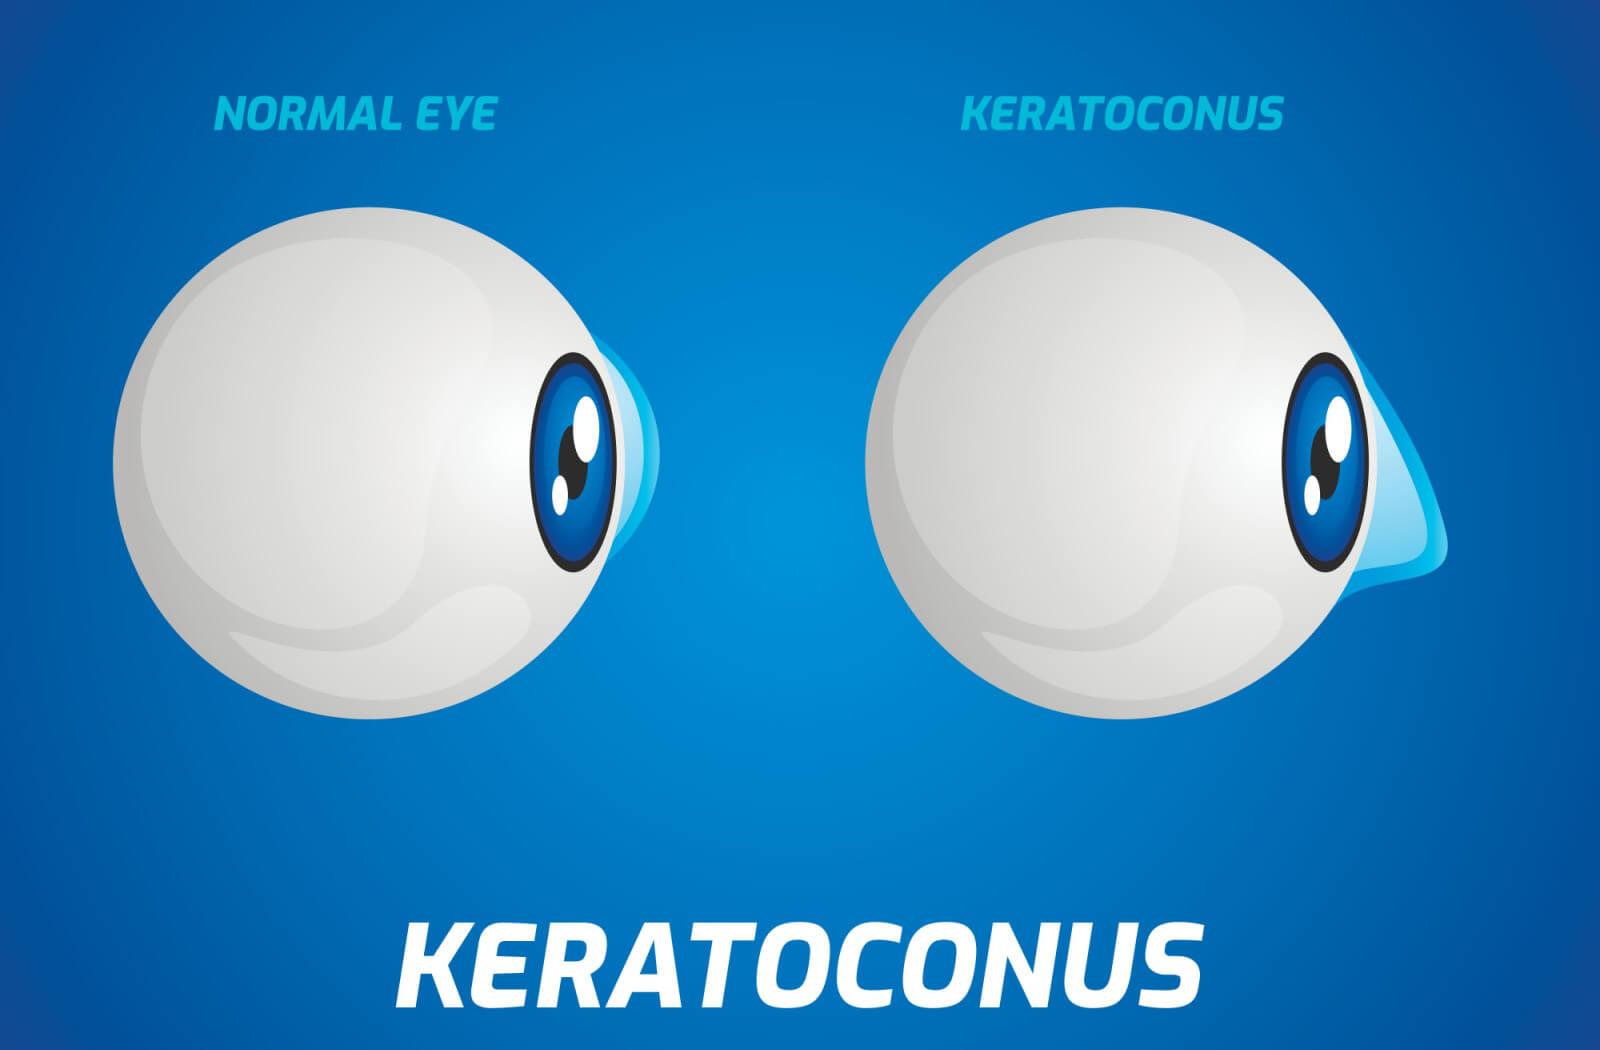 a graphic of two eyes from the side. one is a normal eye, and the other shows the cornea bulging, as that eye has keratoconus